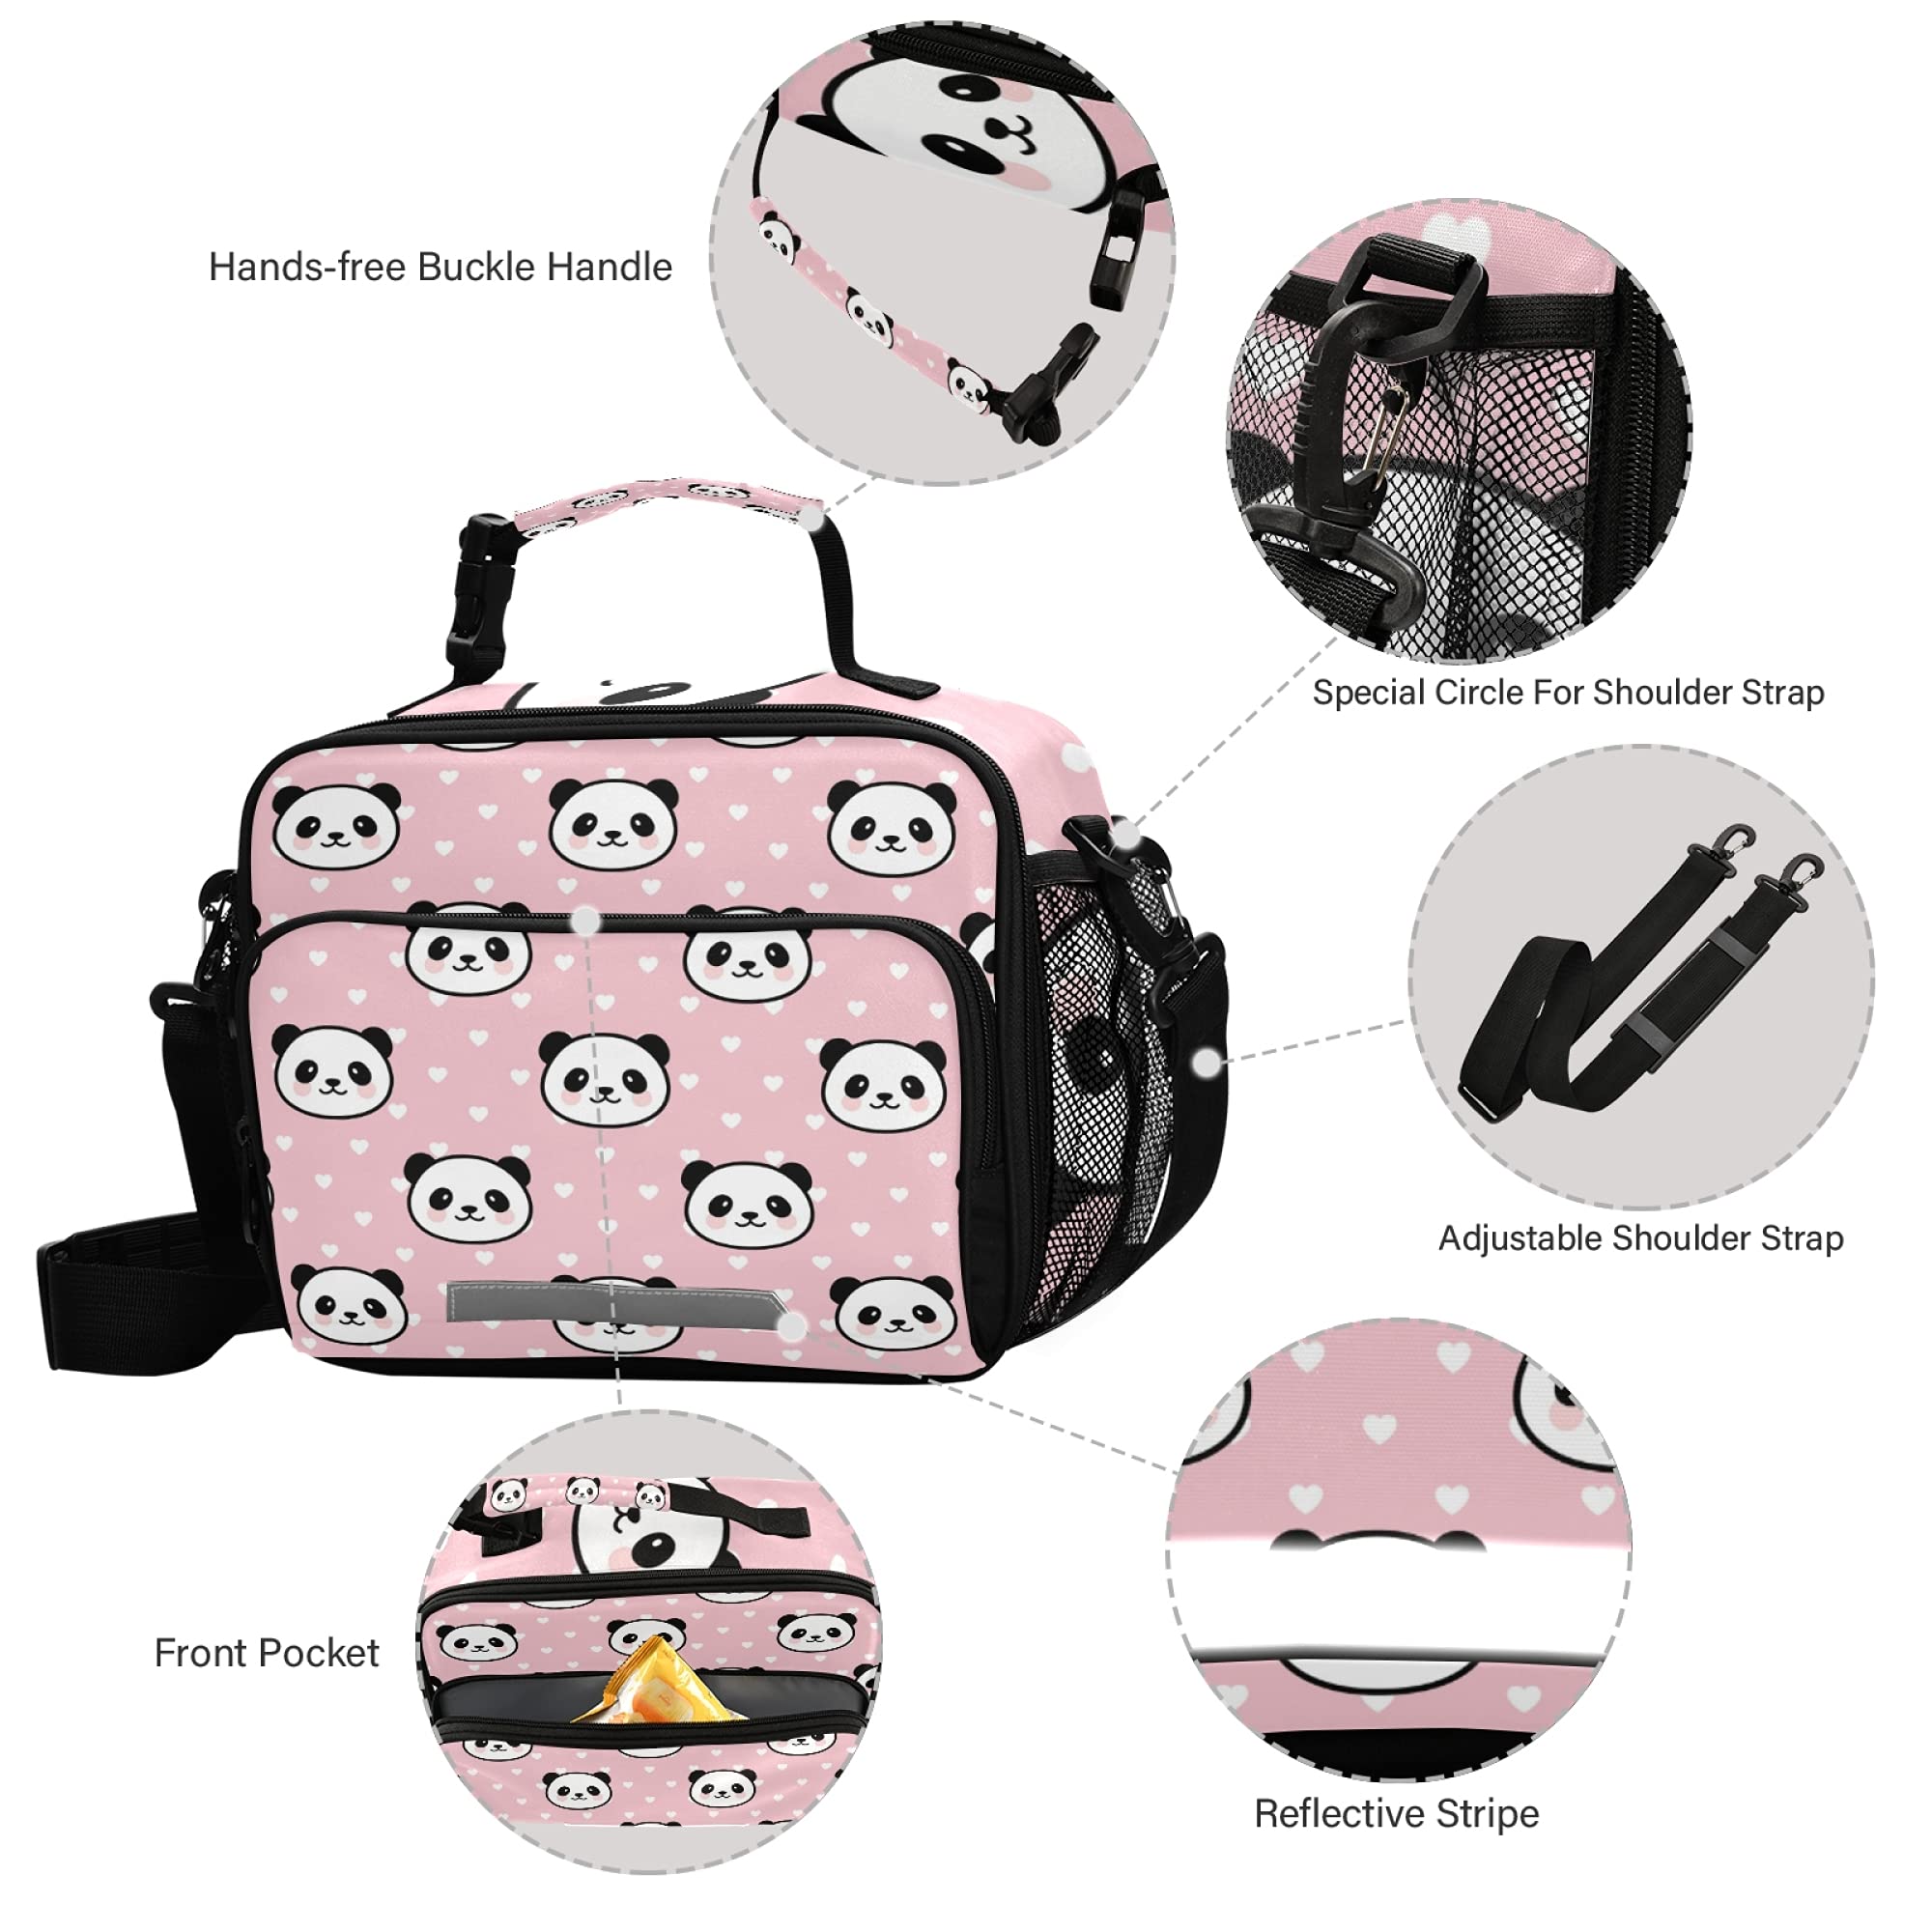 ZOEO Girls Panda Lunch Box Pink Polka Dot School Kids Lunch Bag for Teens Snacks Insulated Cooler Tote Ice Pack Freezable, Fits Bento Boxes, External Bottle Holder